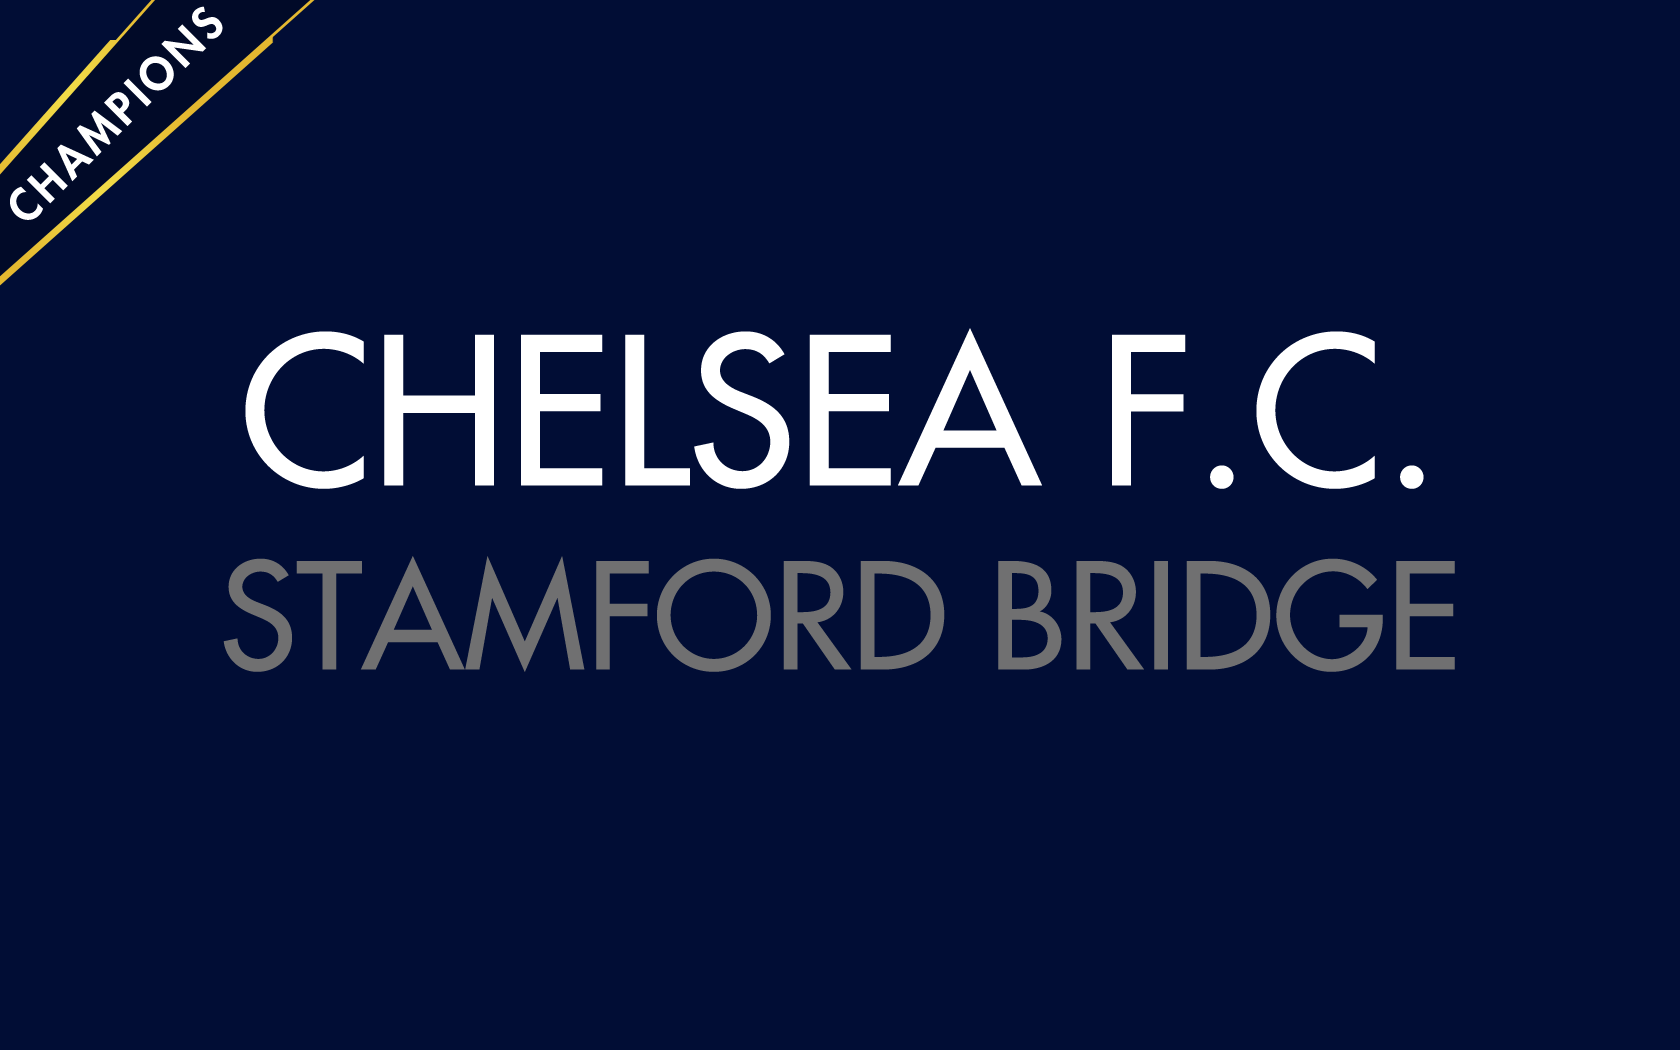 Chelsea Football Club Backgrounds